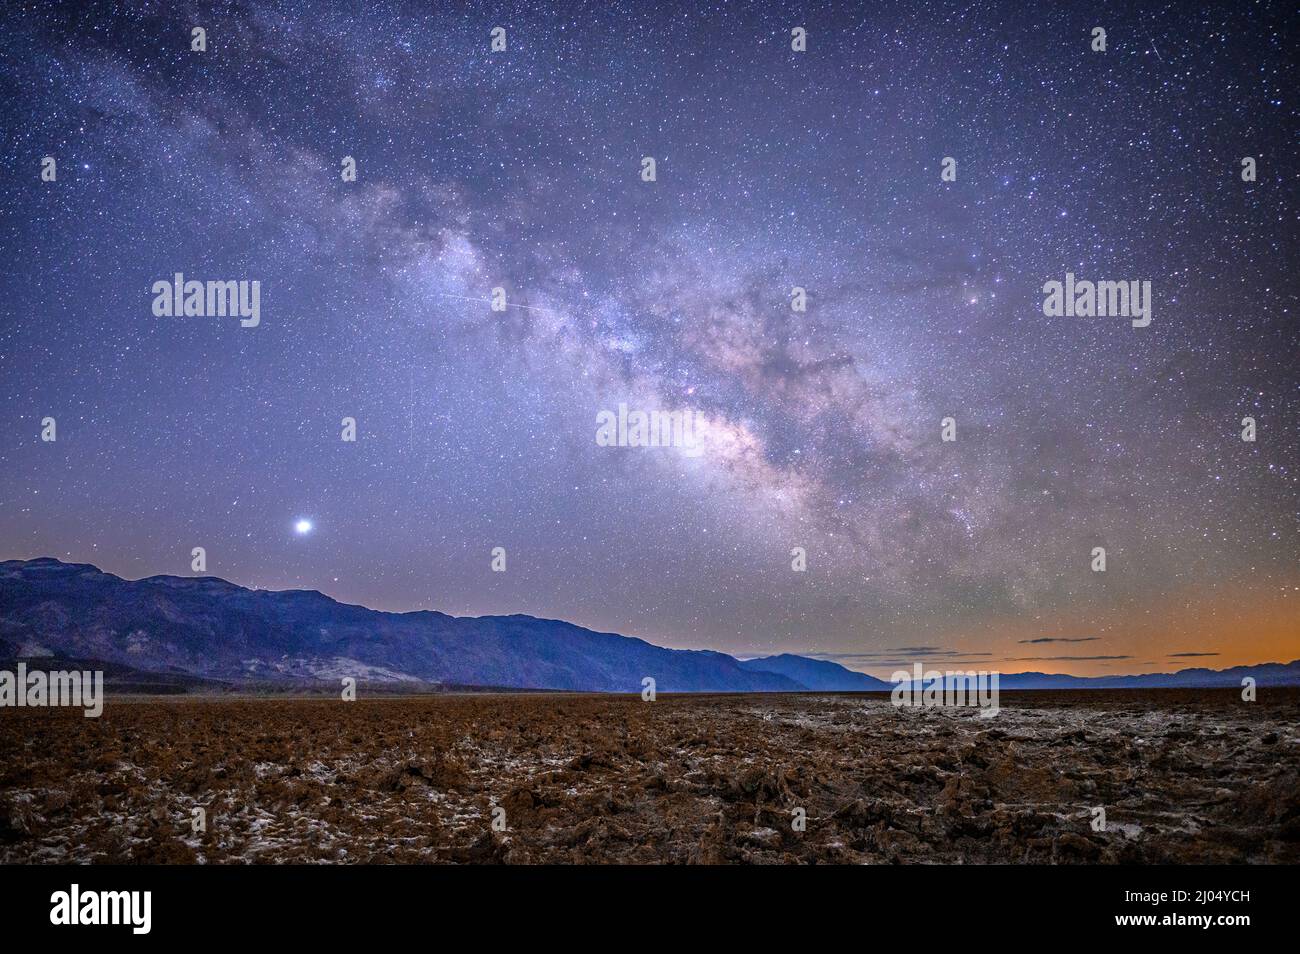 Milky Way over Badwater Basin and the Black Mountains, Death Valley National Park, California. Stock Photo